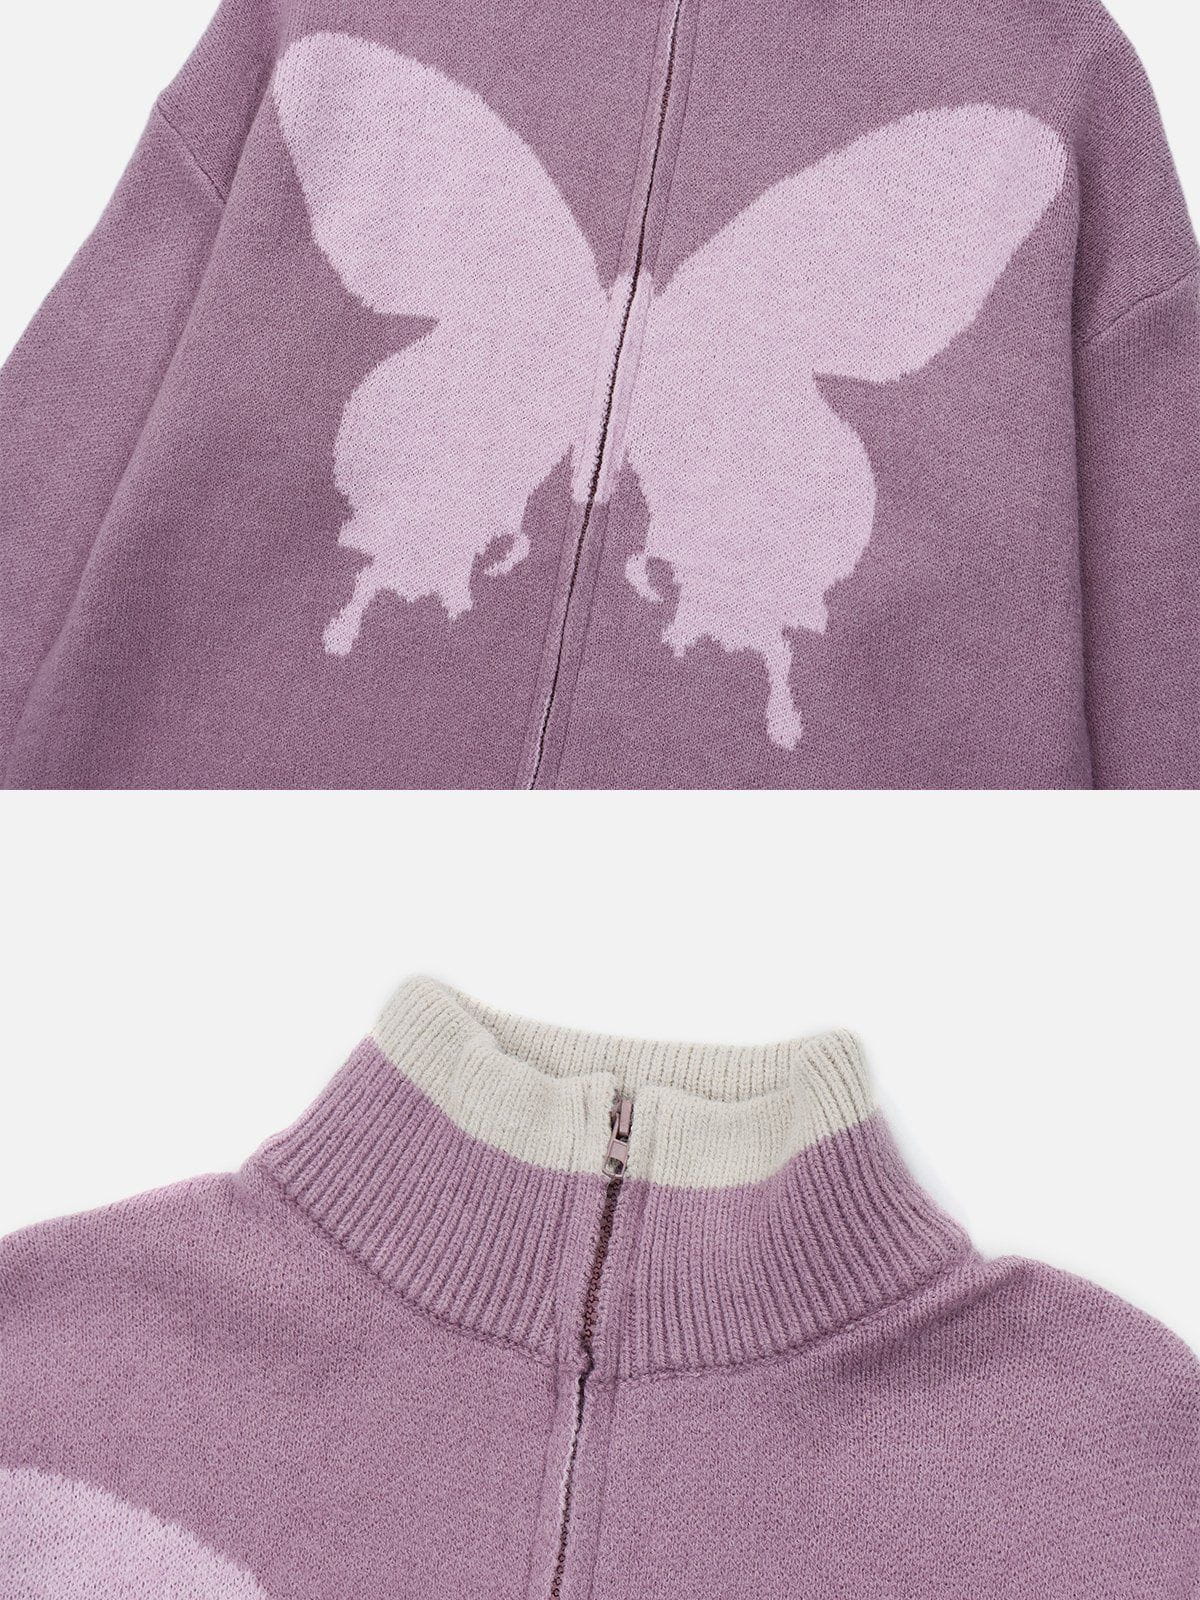 Sneakerland® - Butterfly Embroidery Cardigan